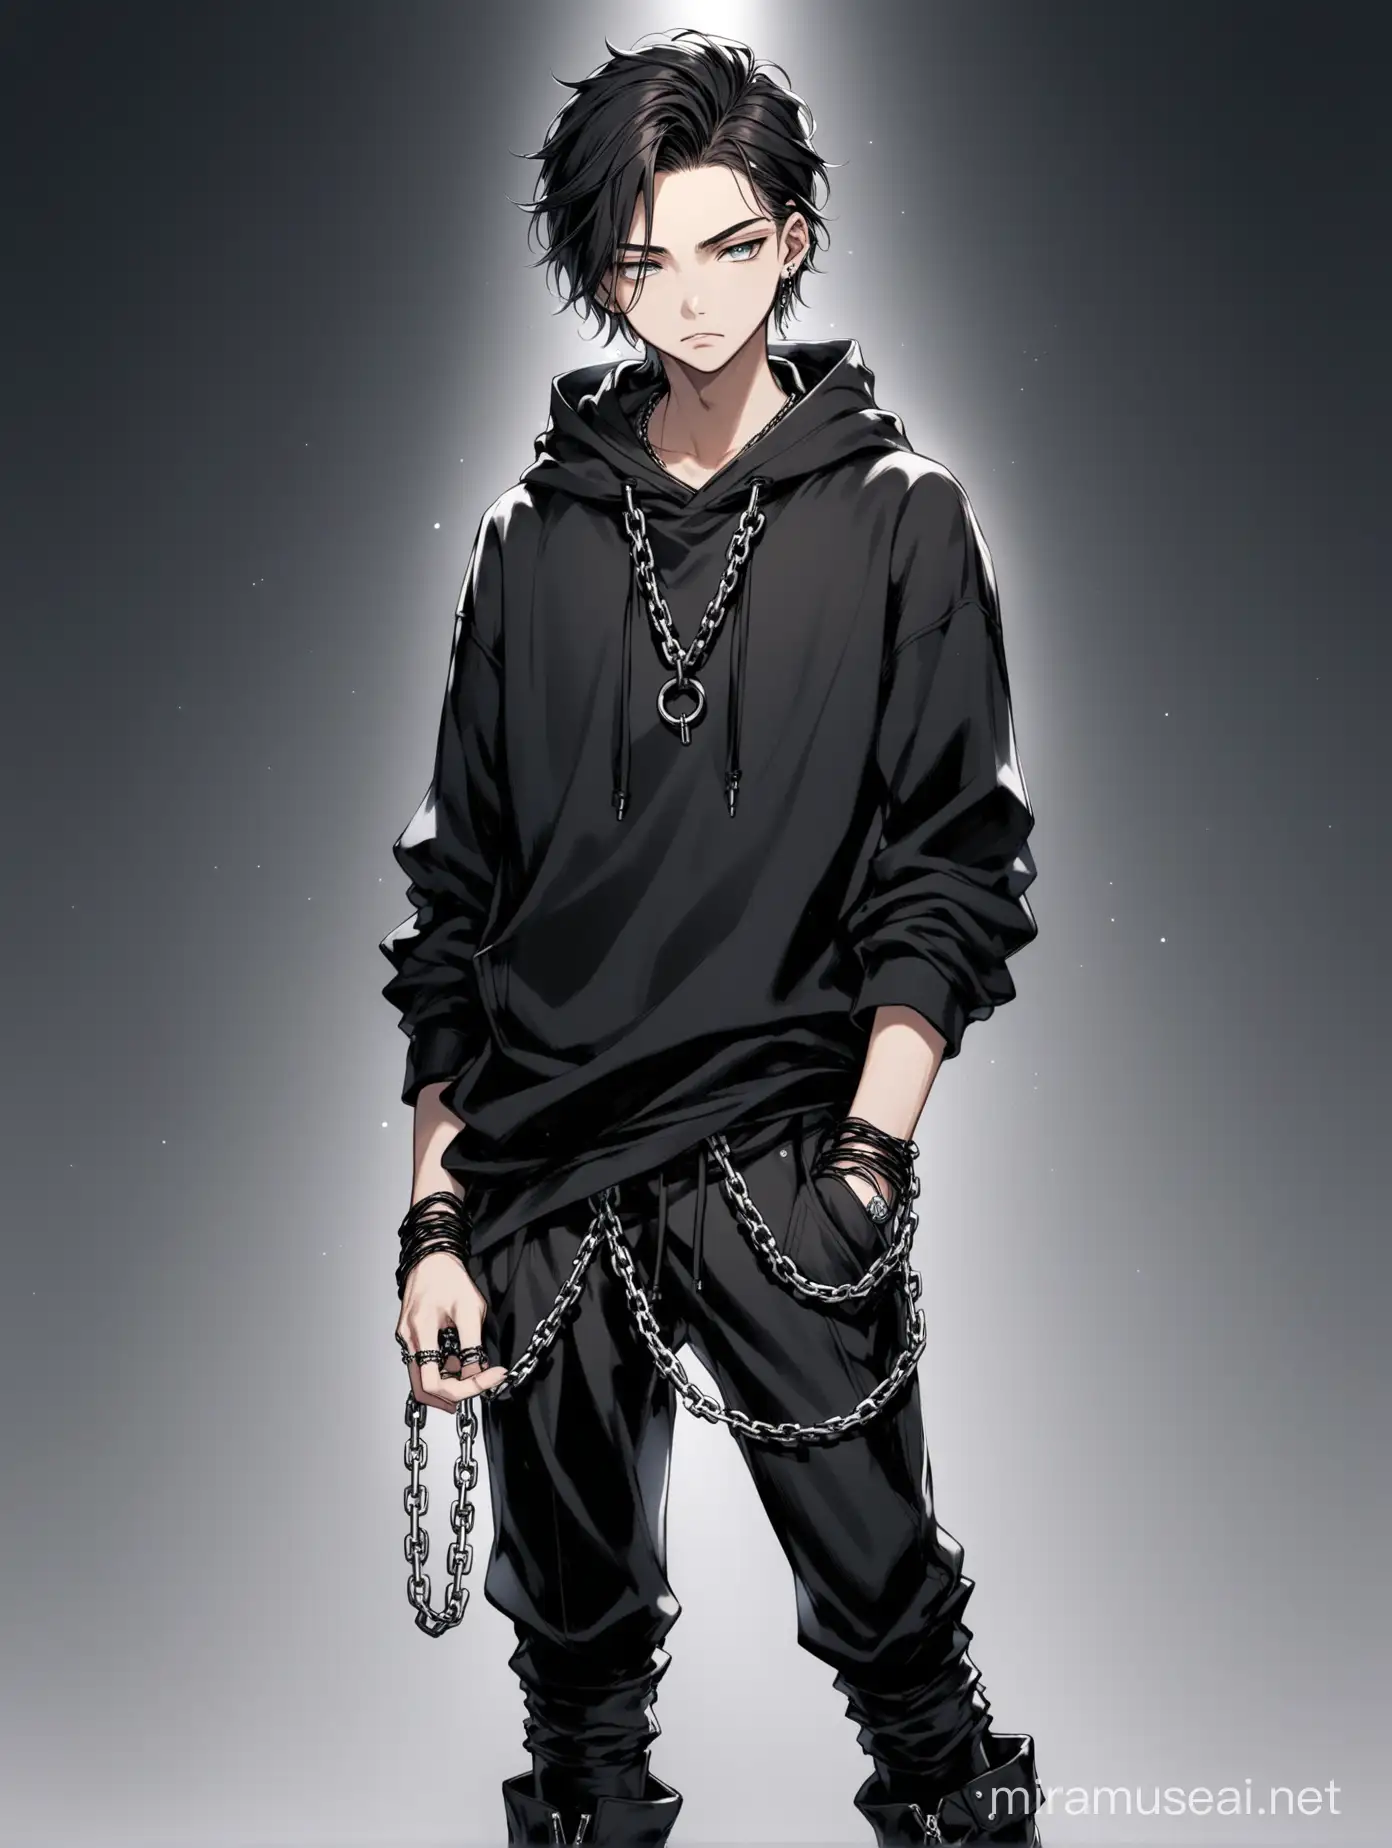 A handsome, mysterious teenage boy in his. His hair is black and tied back. He wears eyeliner, a black earring, and a ring on his lower lip. He has a sleepy look in his eyes. He wears a black hoodie, wears black headphones, wears folded black pants, wears long black boots, and wears rings on his fingers, he hangs a chain around his neck, and accessories.